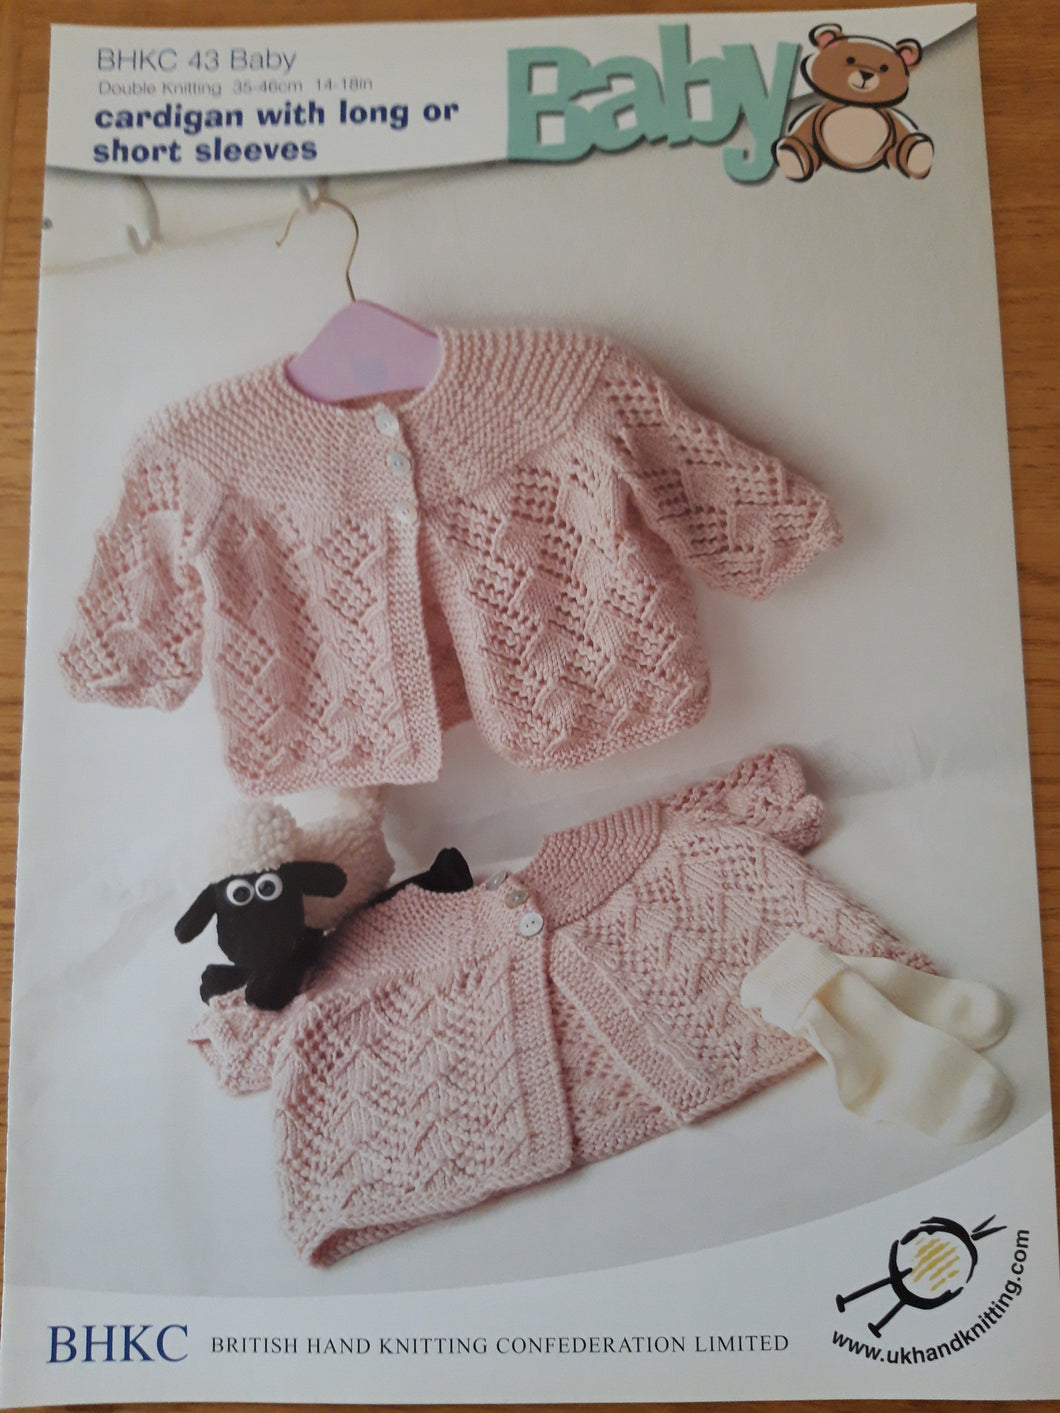 BHKC 43 - Baby Double Knitting Pattern - Cardigan - 14